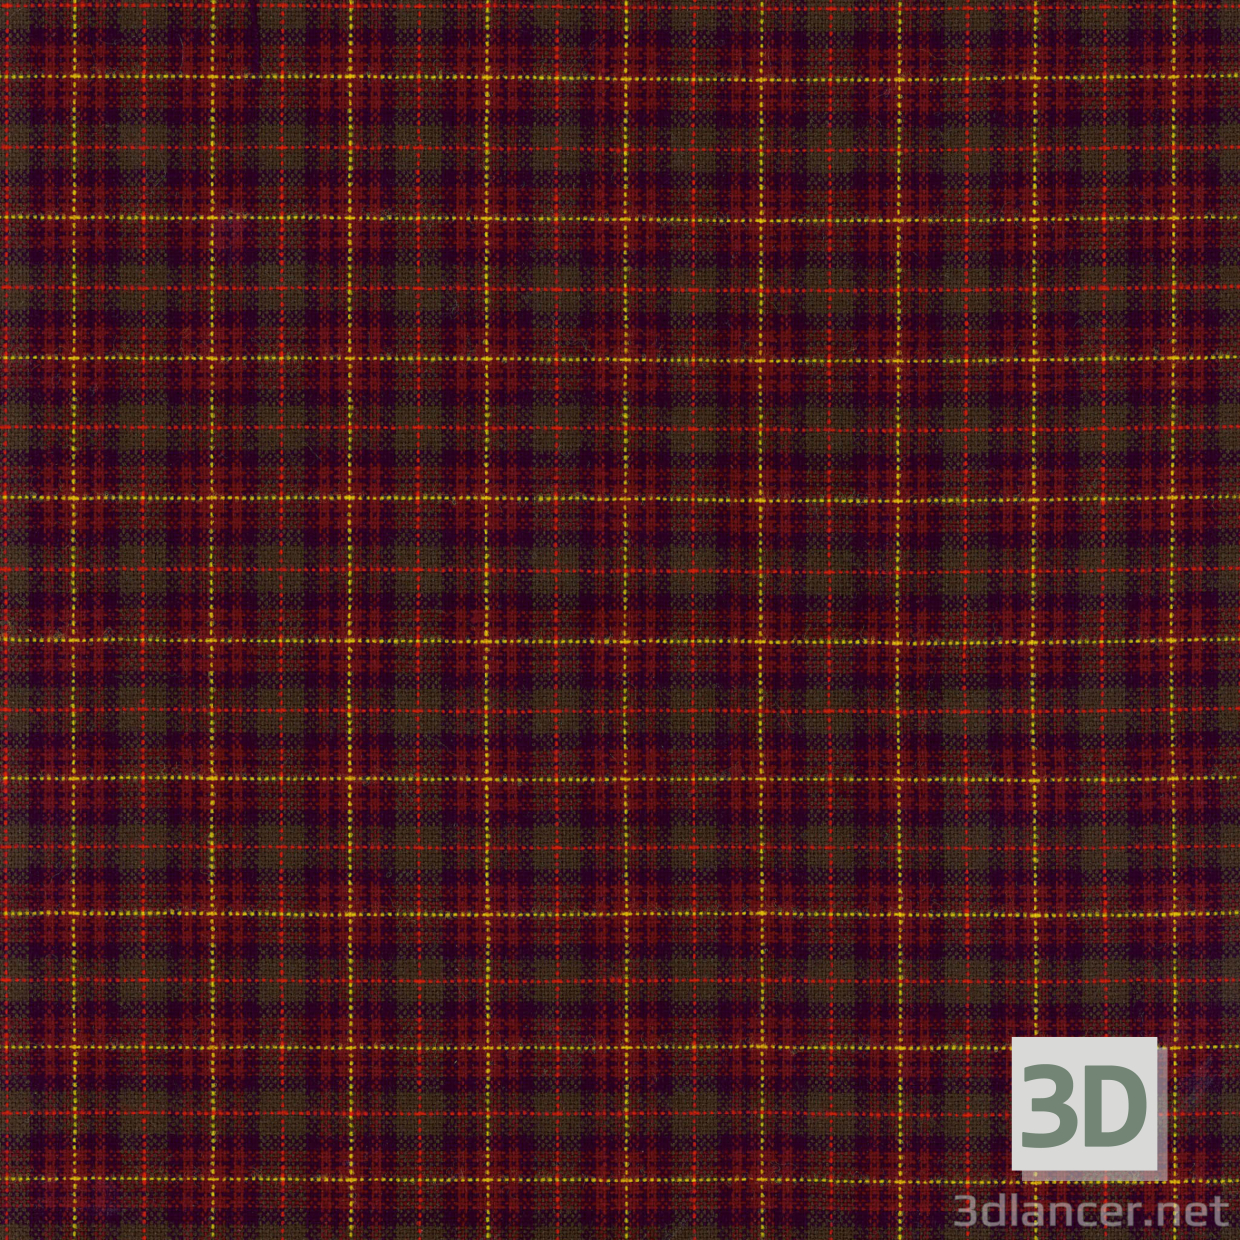 Texture plaid 21 free download - image